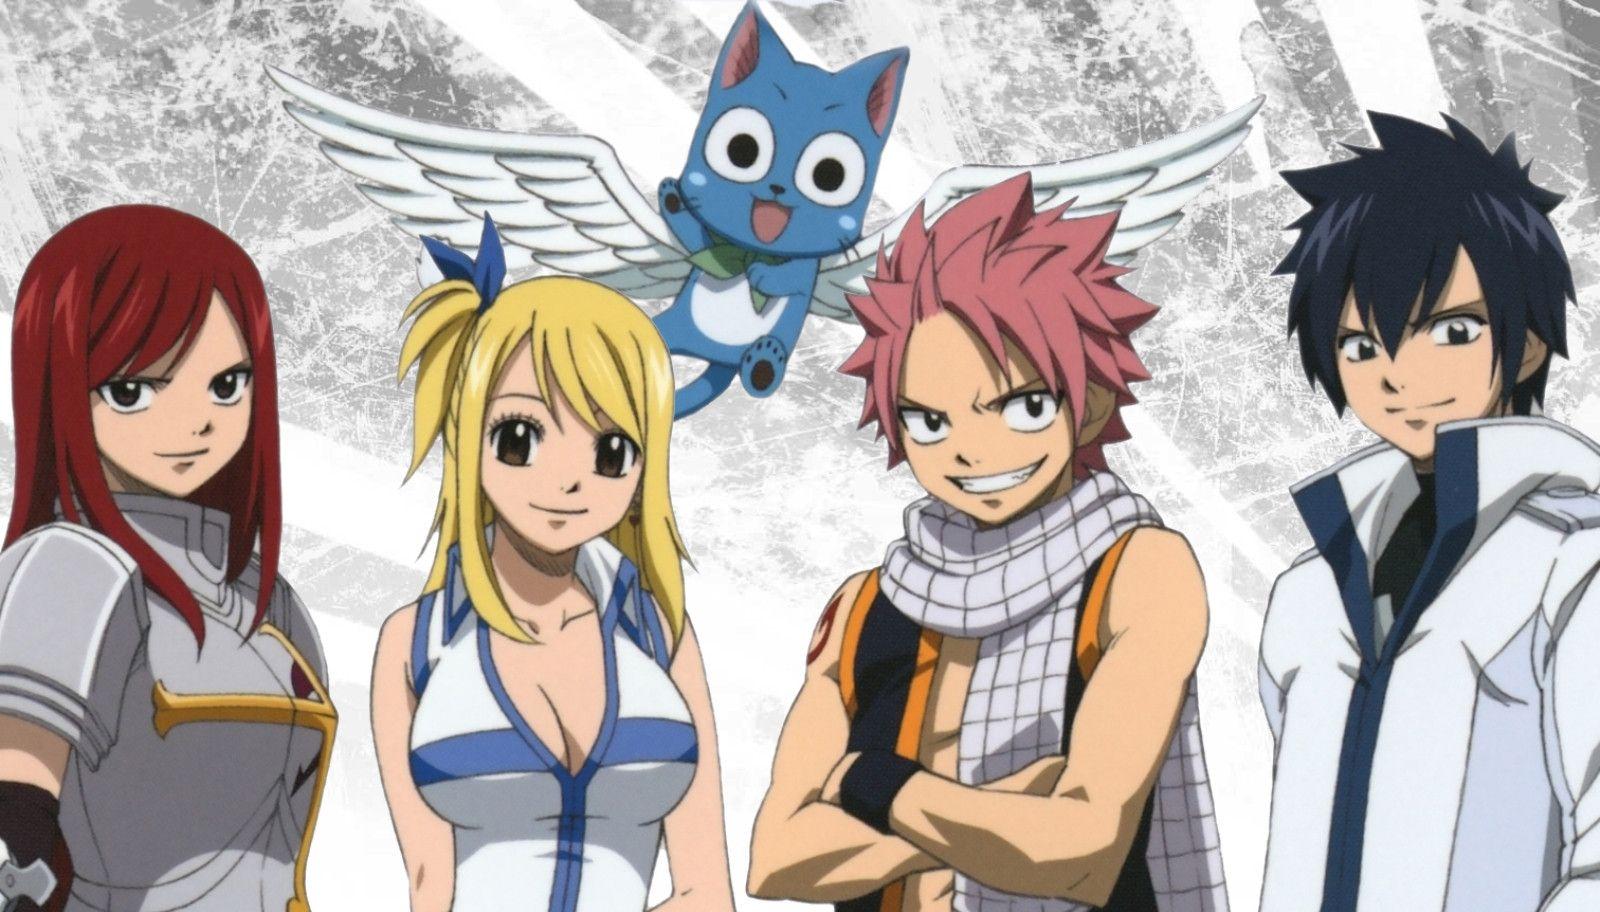 Fairy Tail Wallpapers Free Download Anime Wallpapers HD Fairy Tail